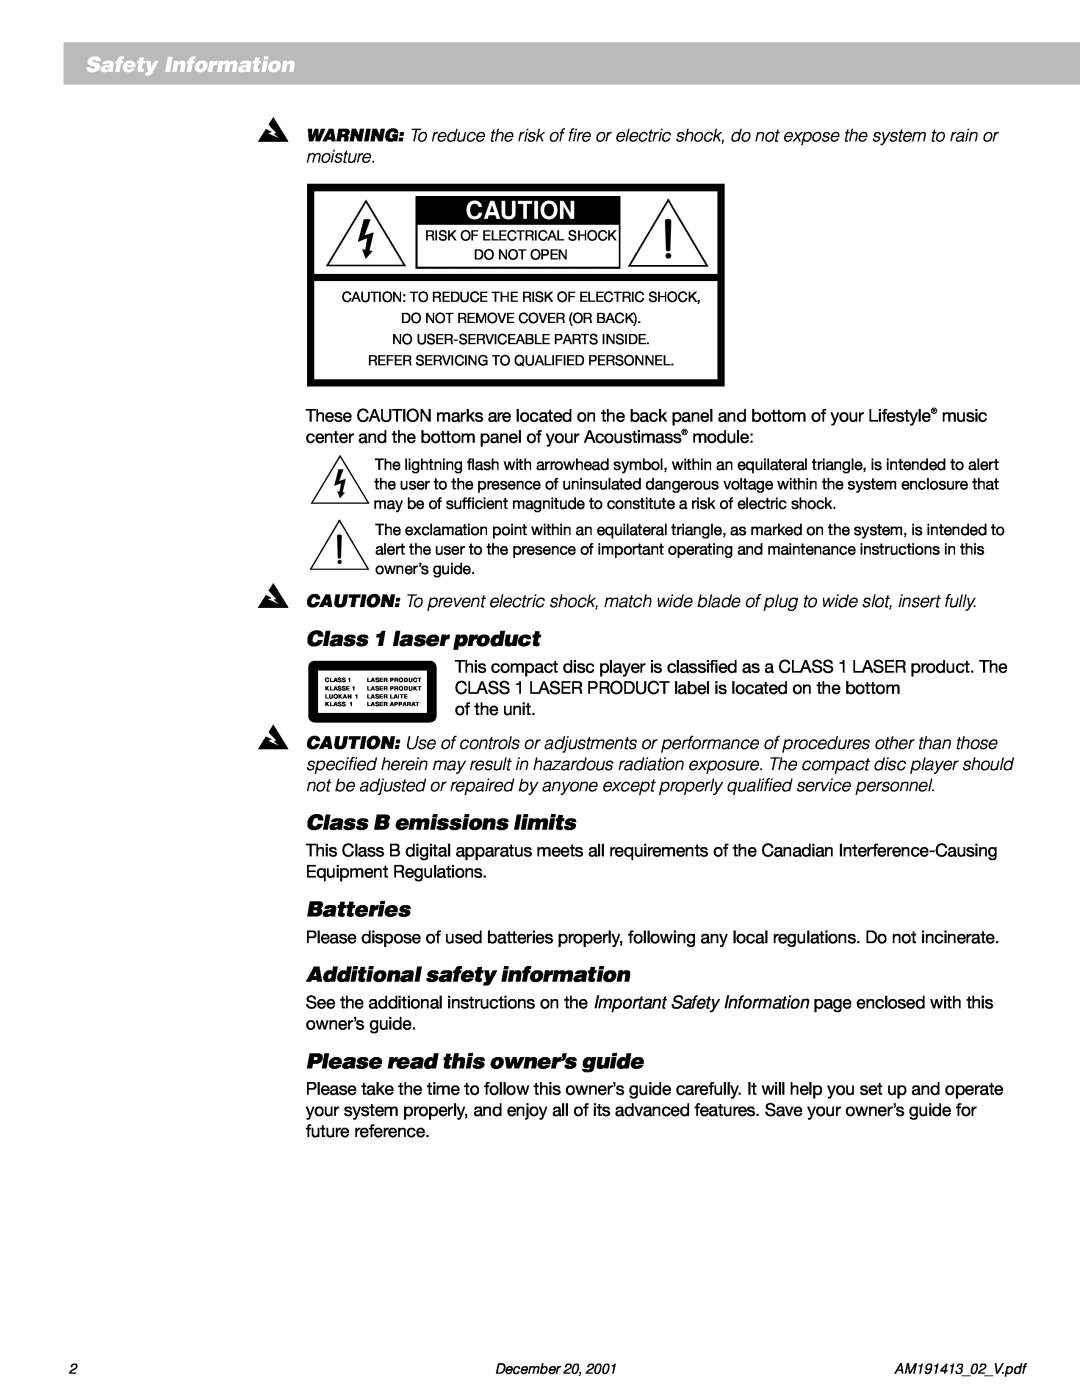 Bose 5 manual Safety Information, Class 1 laser product, Class B emissions limits, Batteries, Additional safety information 